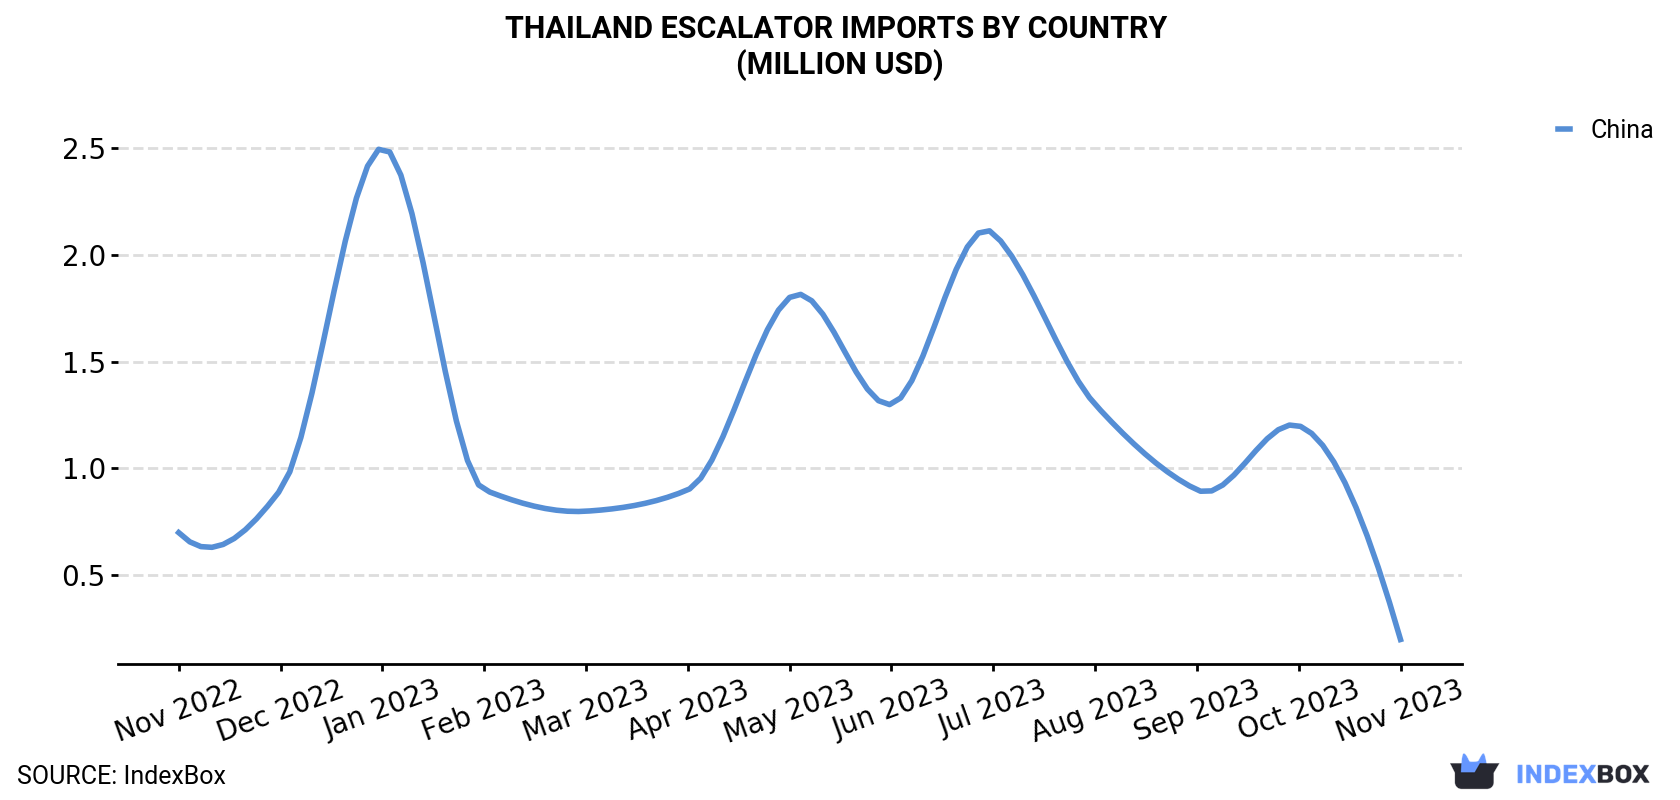 Thailand Escalator Imports By Country (Million USD)